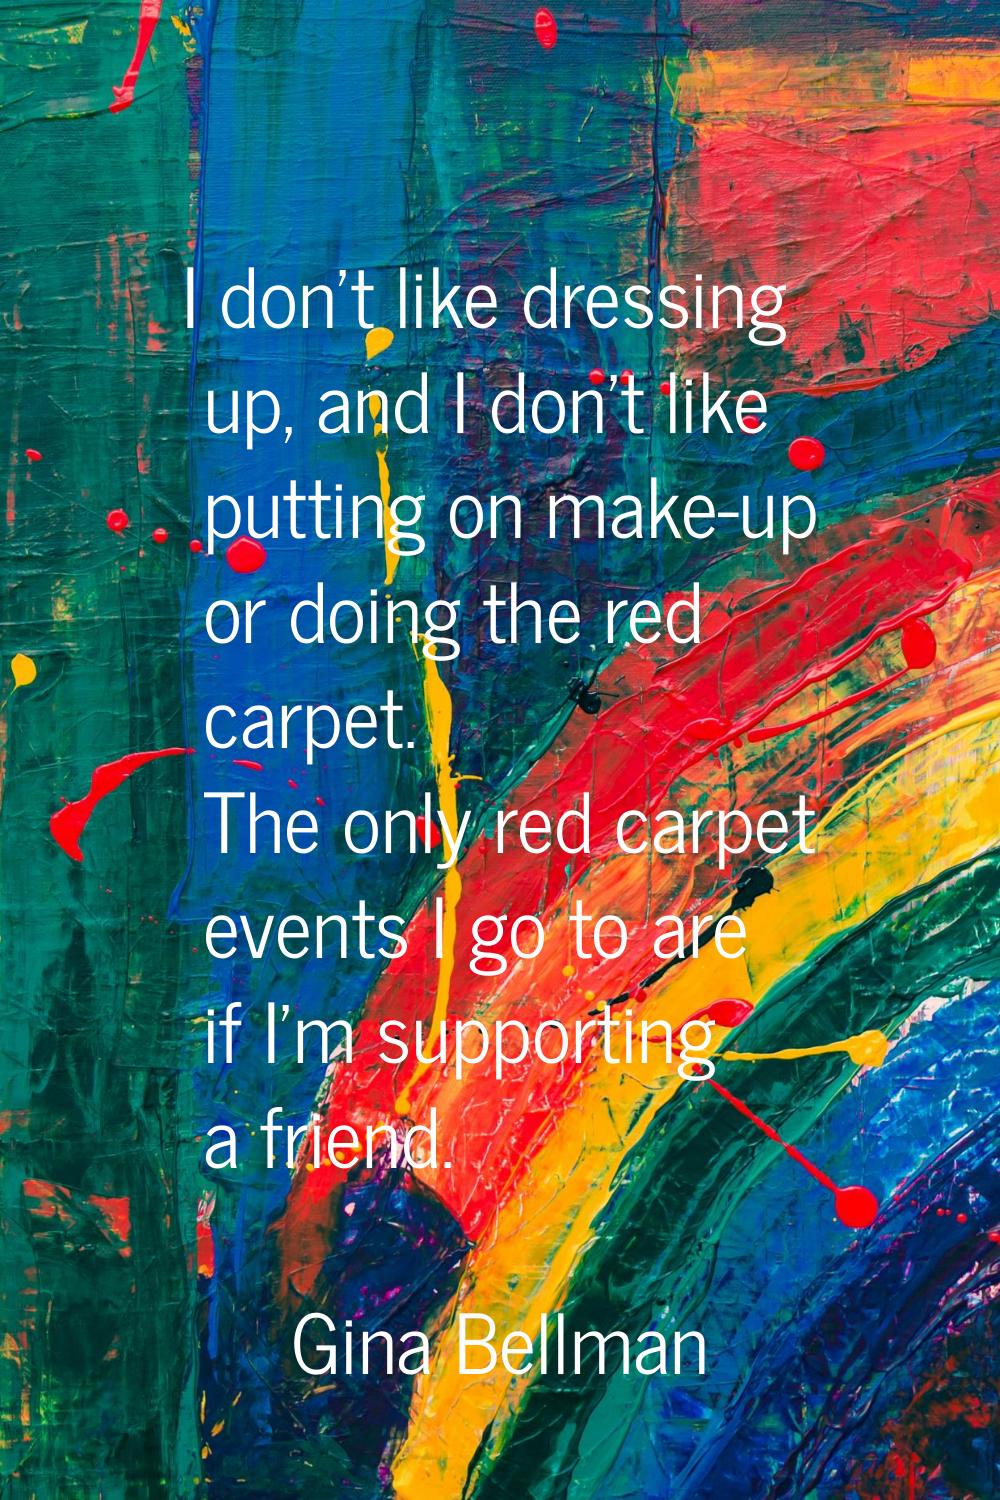 I don't like dressing up, and I don't like putting on make-up or doing the red carpet. The only red